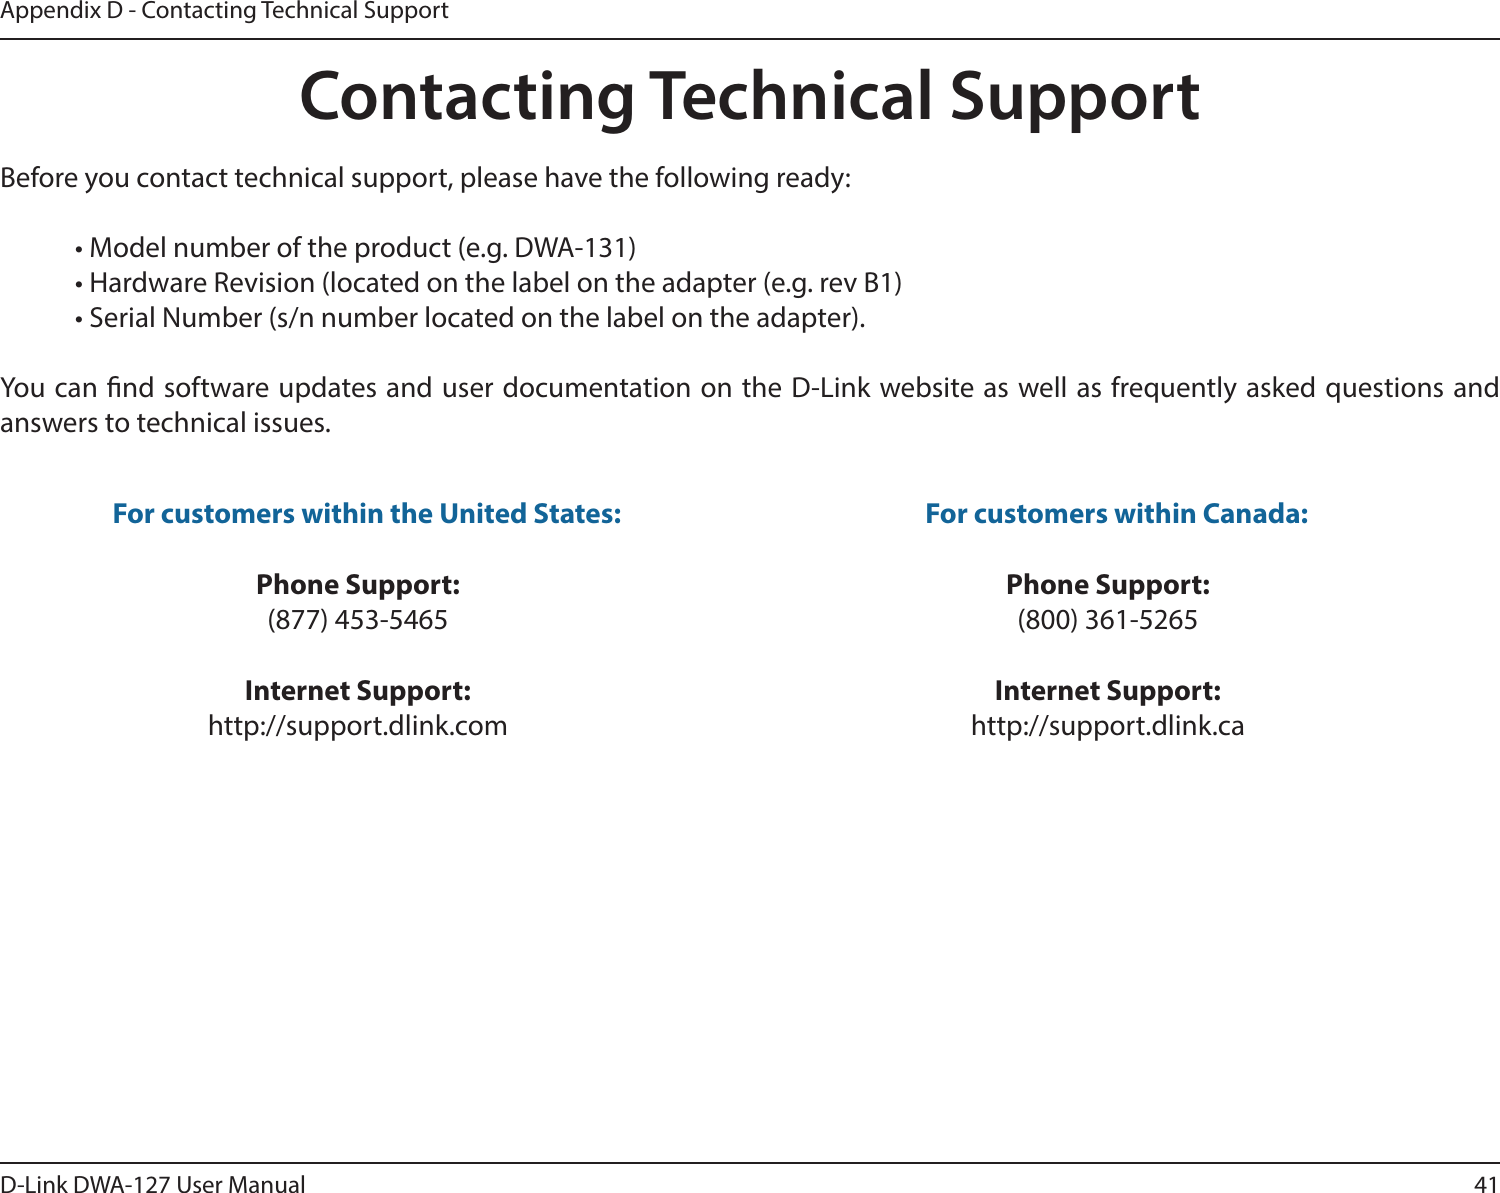 41D-Link DWA-127 User ManualAppendix D - Contacting Technical SupportContacting Technical SupportBefore you contact technical support, please have the following ready:  • Model number of the product (e.g. DWA-131)  • Hardware Revision (located on the label on the adapter (e.g. rev B1)  • Serial Number (s/n number located on the label on the adapter). You can nd software updates and user documentation on the D-Link website as well as frequently asked questions and answers to technical issues.For customers within the United States: Phone Support:(877) 453-5465Internet Support:http://support.dlink.com For customers within Canada: Phone Support:(800) 361-5265Internet Support:http://support.dlink.ca 